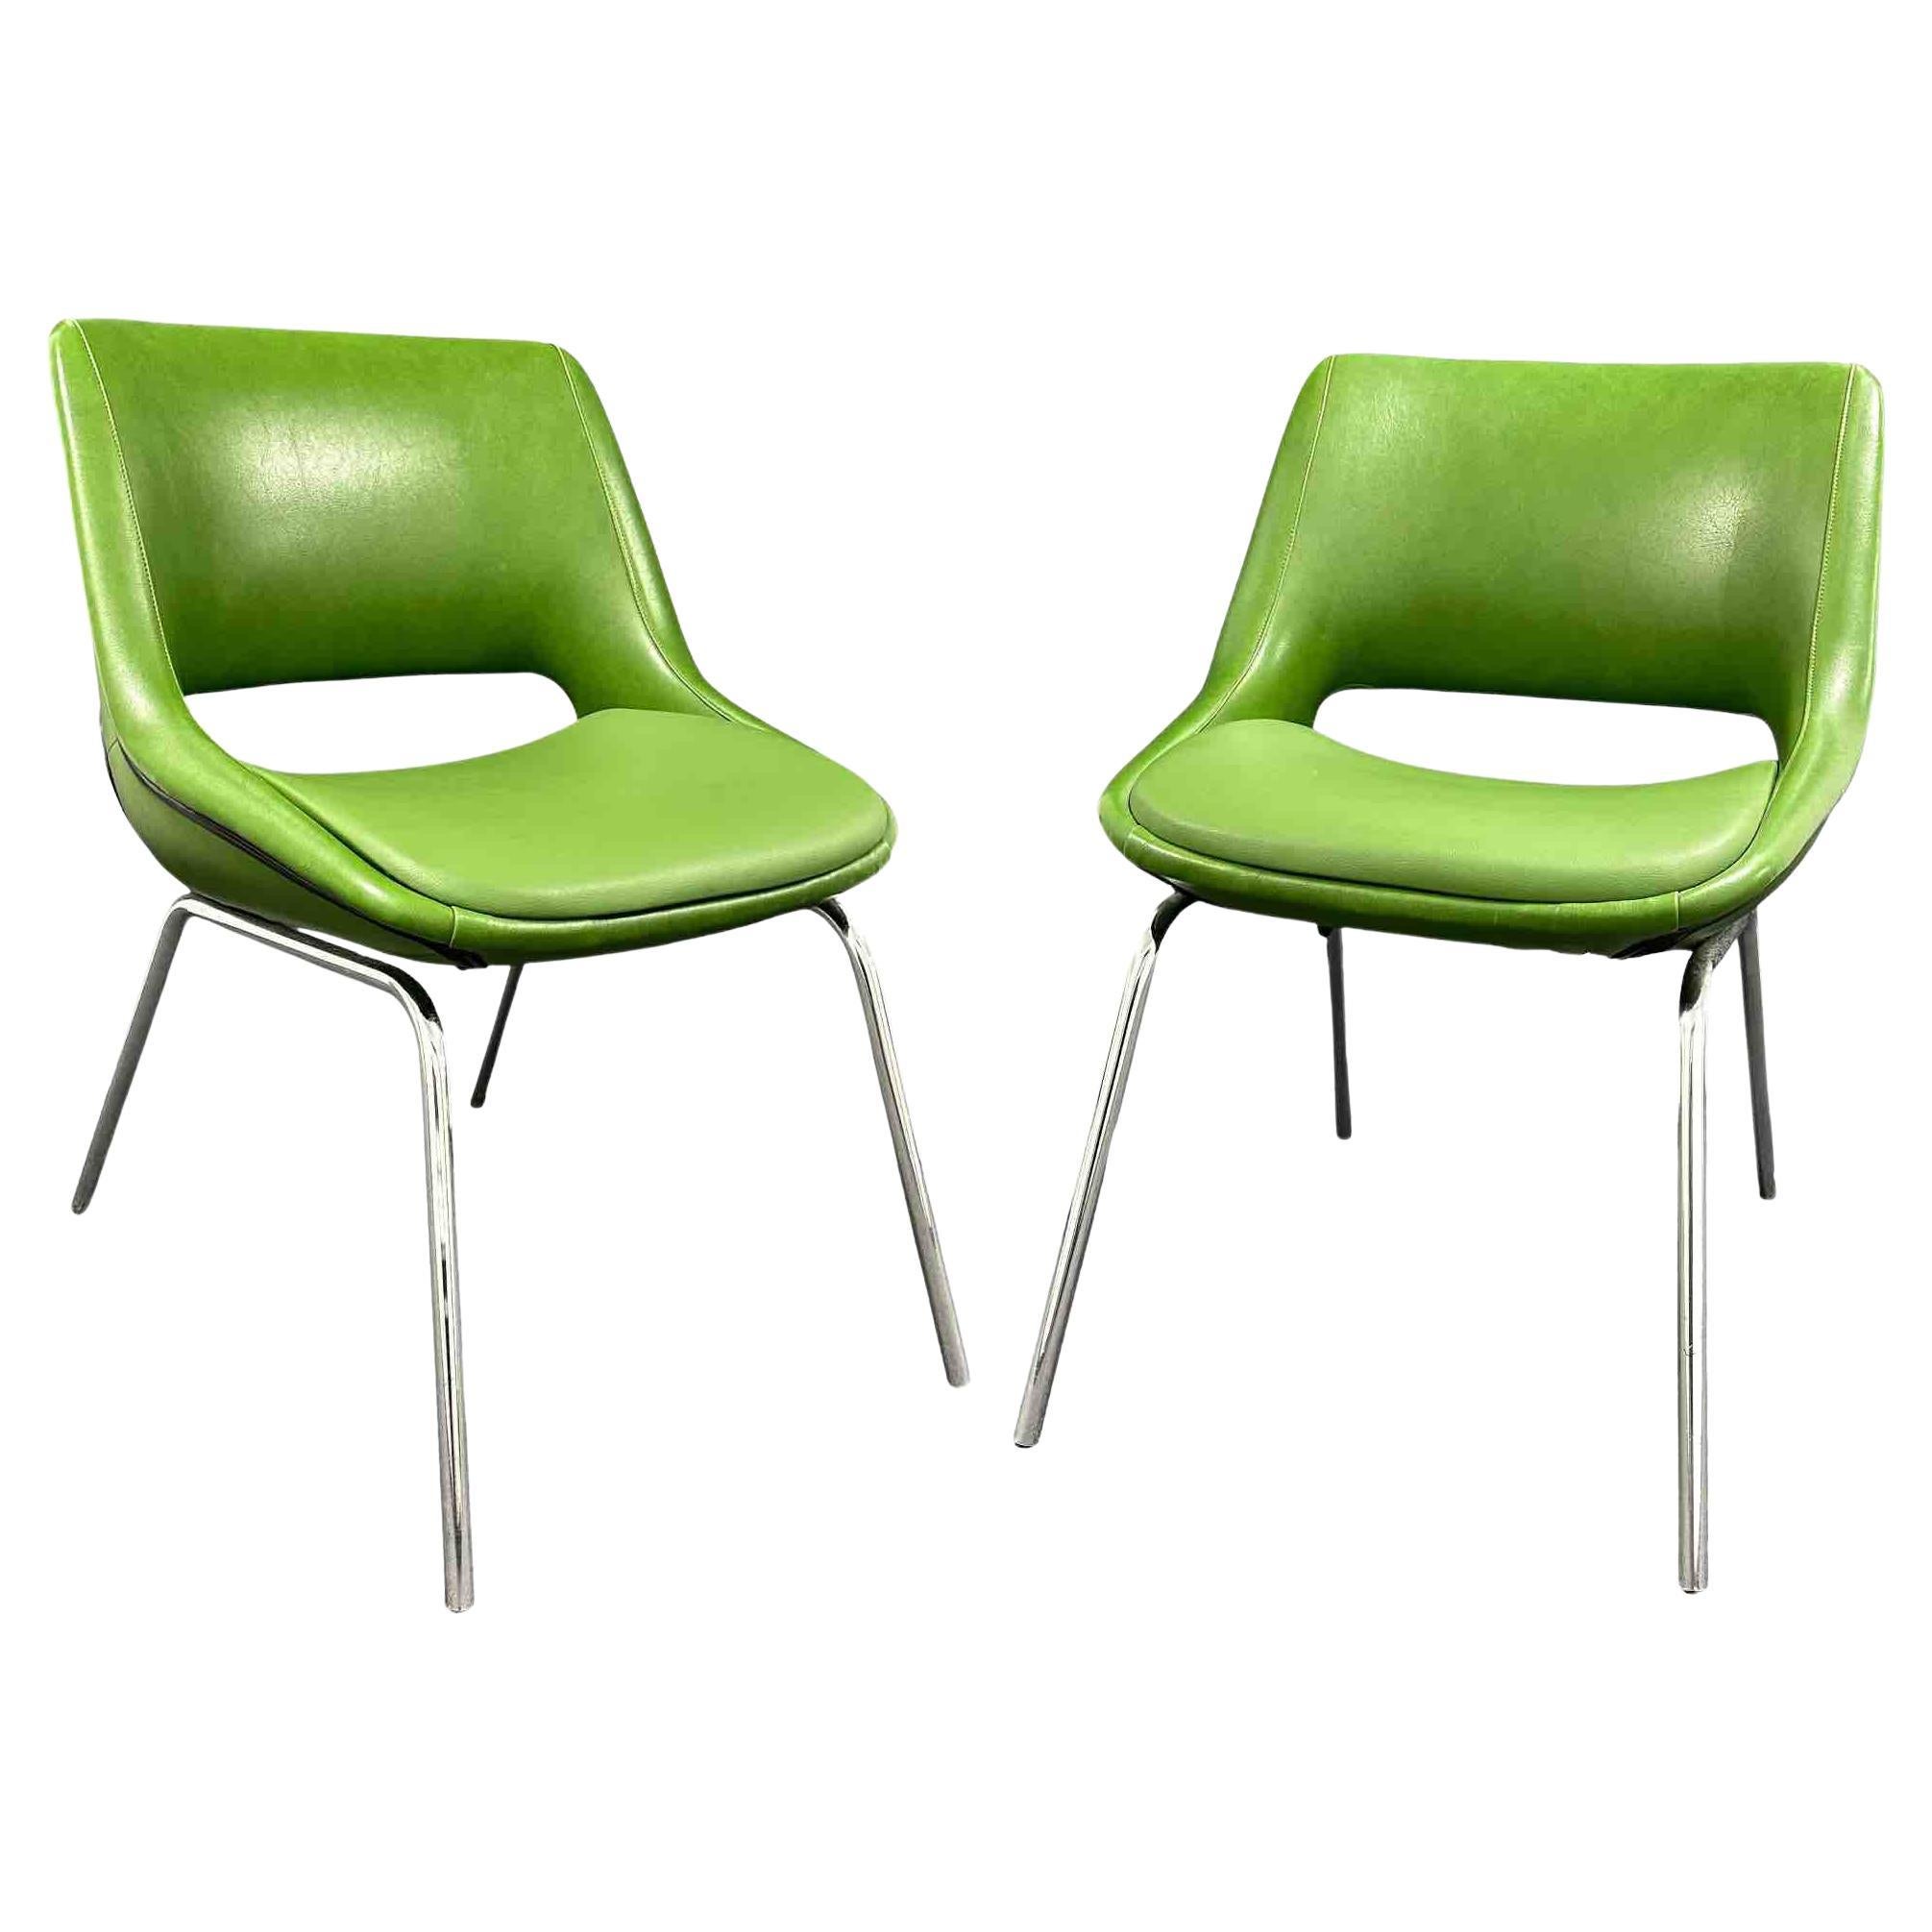 Two Chrome Base, Green Faux Leather Chairs Made by Blaha, Austria, 1970s For Sale